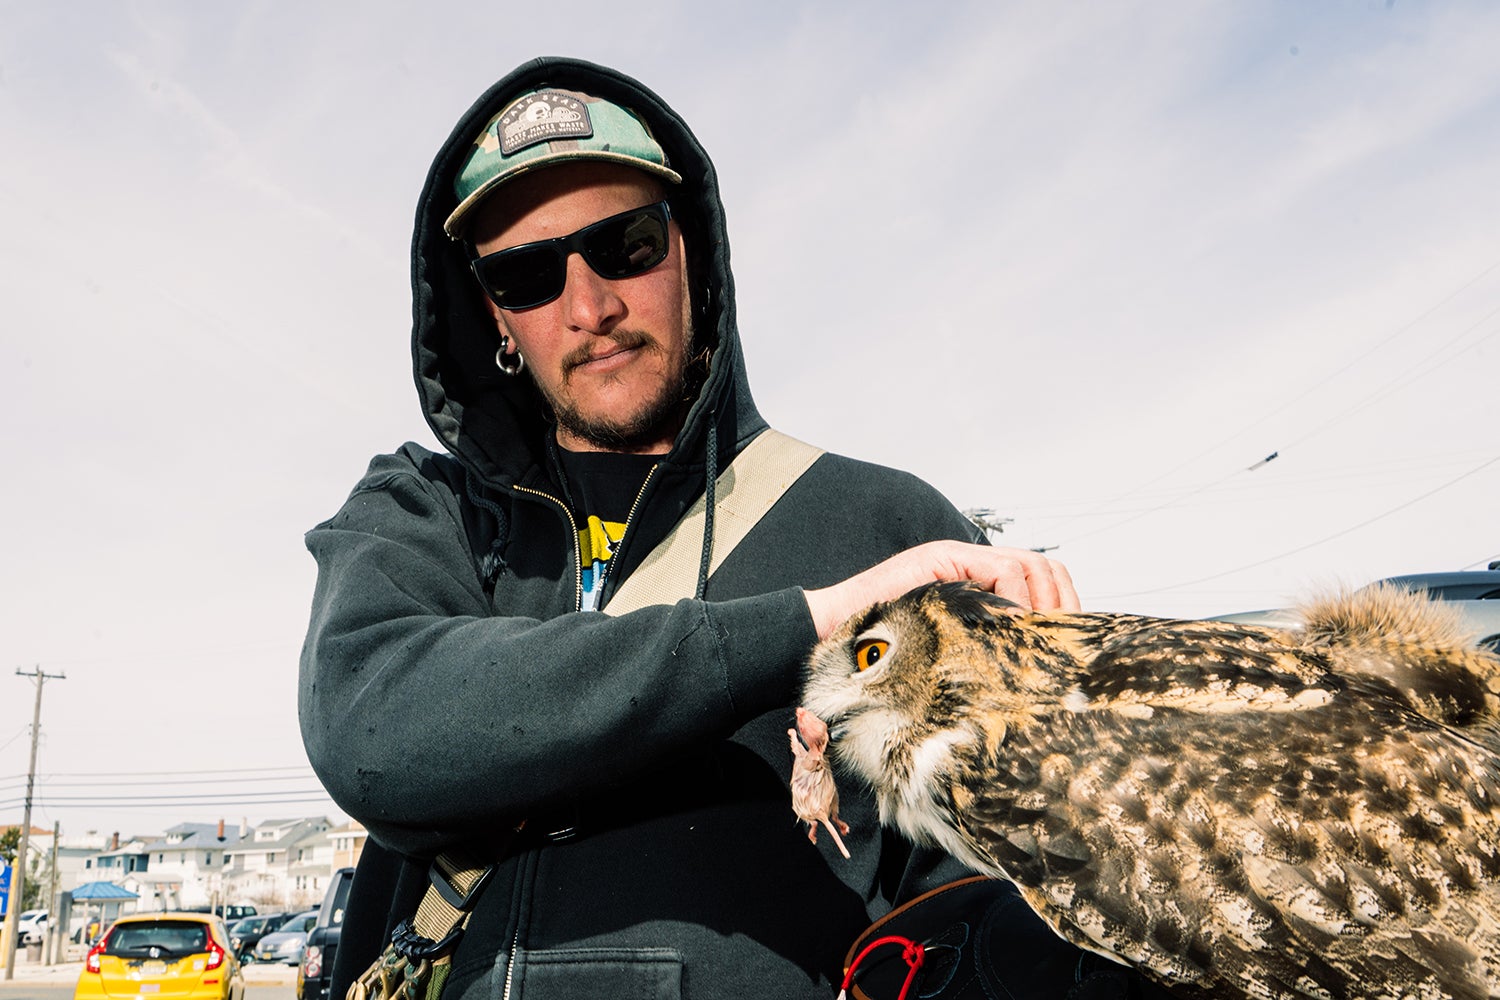 Breaking News falcon handler feeds mouse to eagle-owl